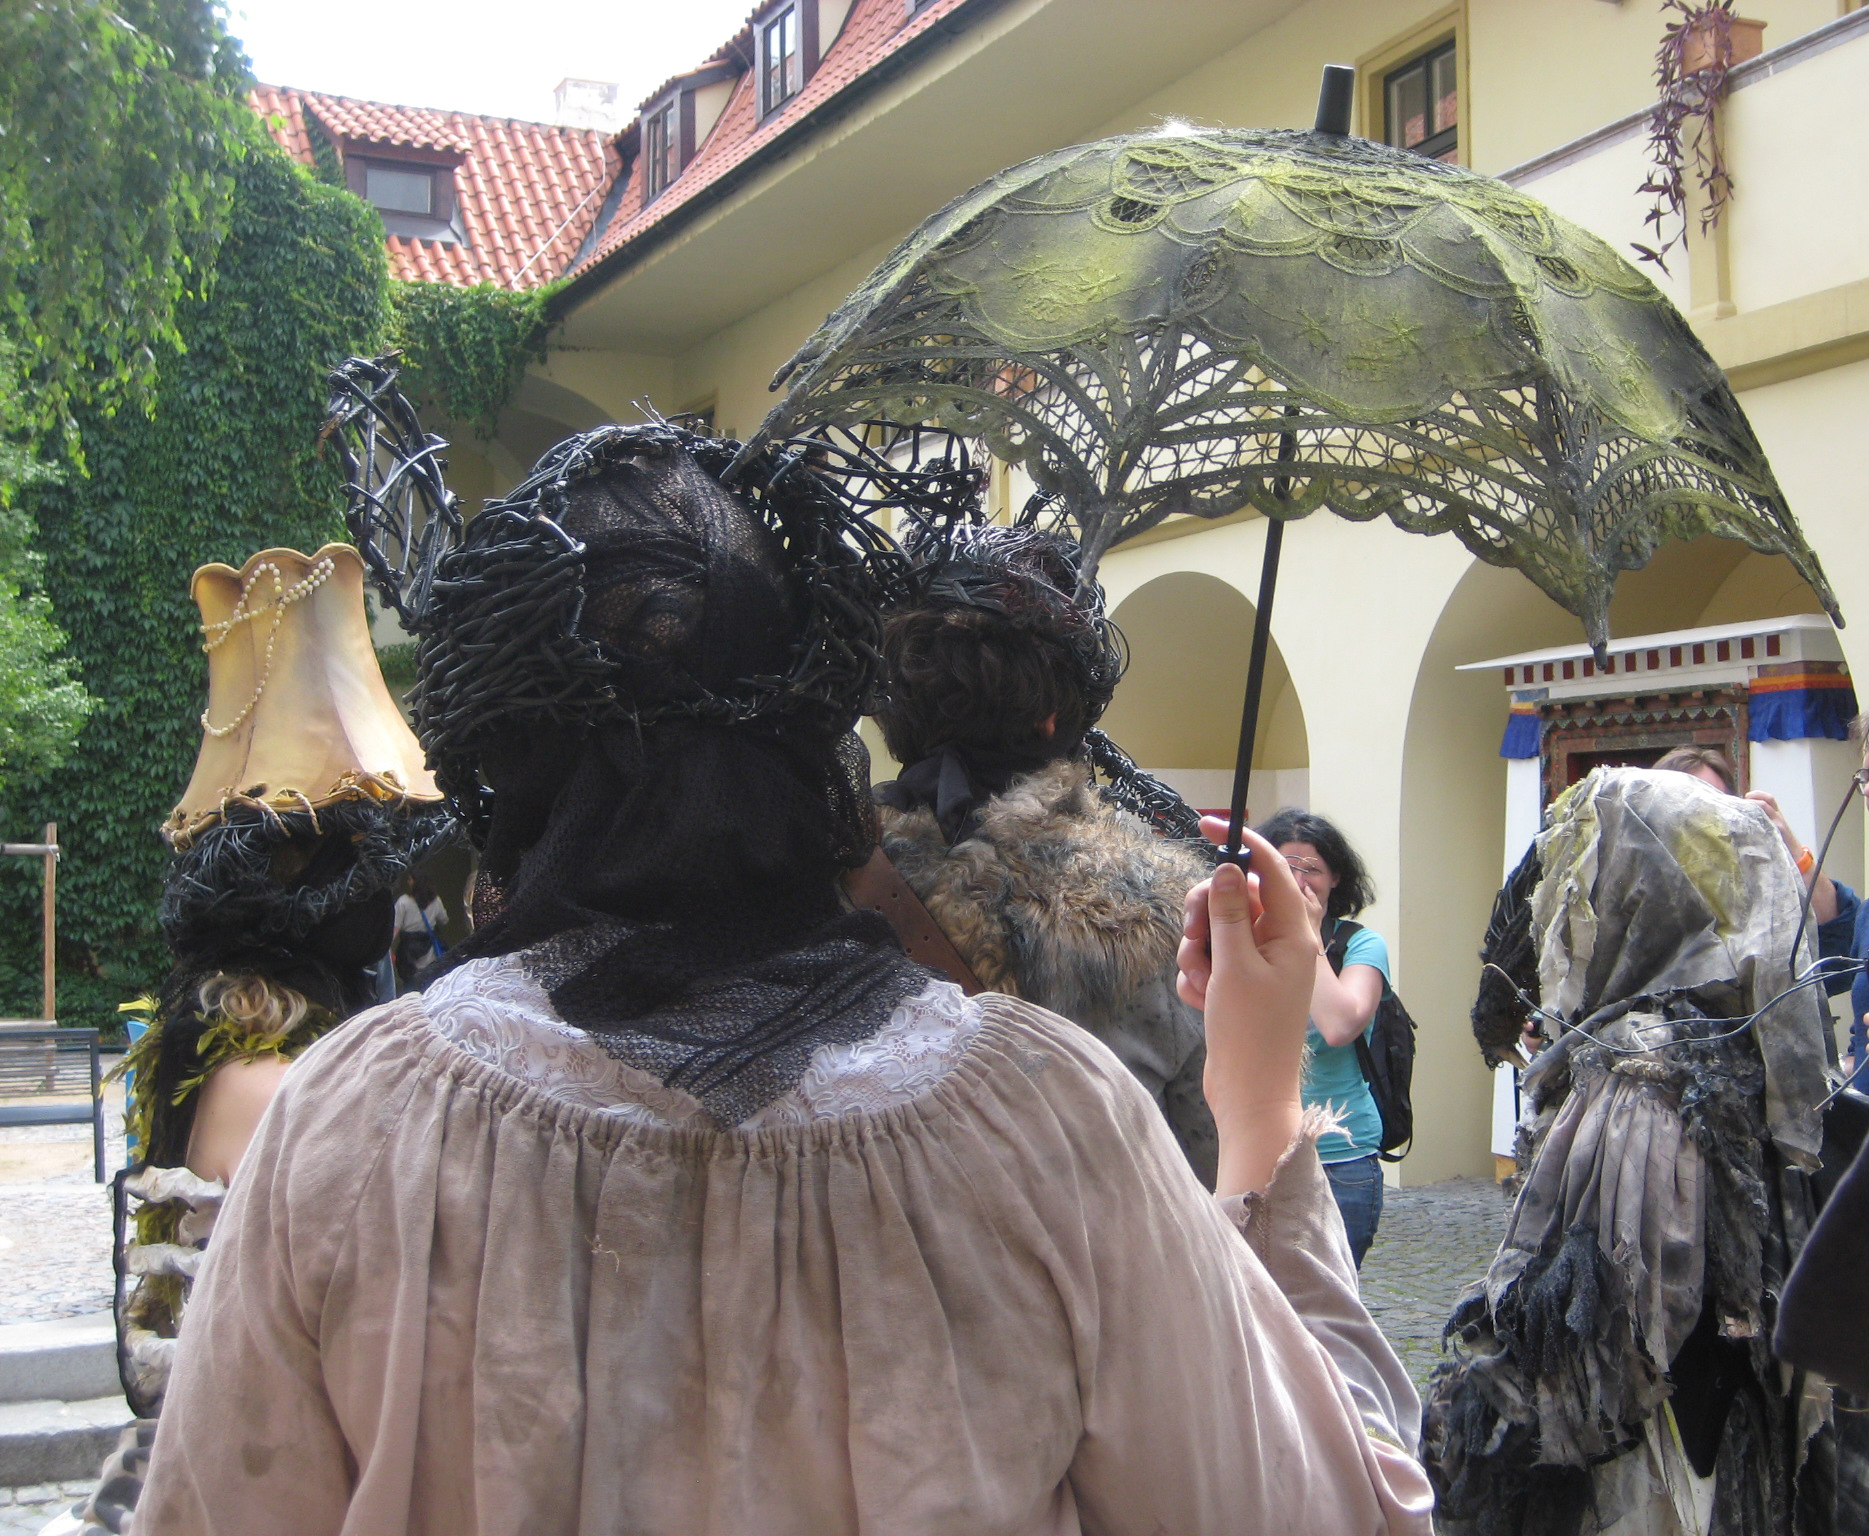 The troupe assembled in the courtyard of the Náprstek Museum near Old Town Square.